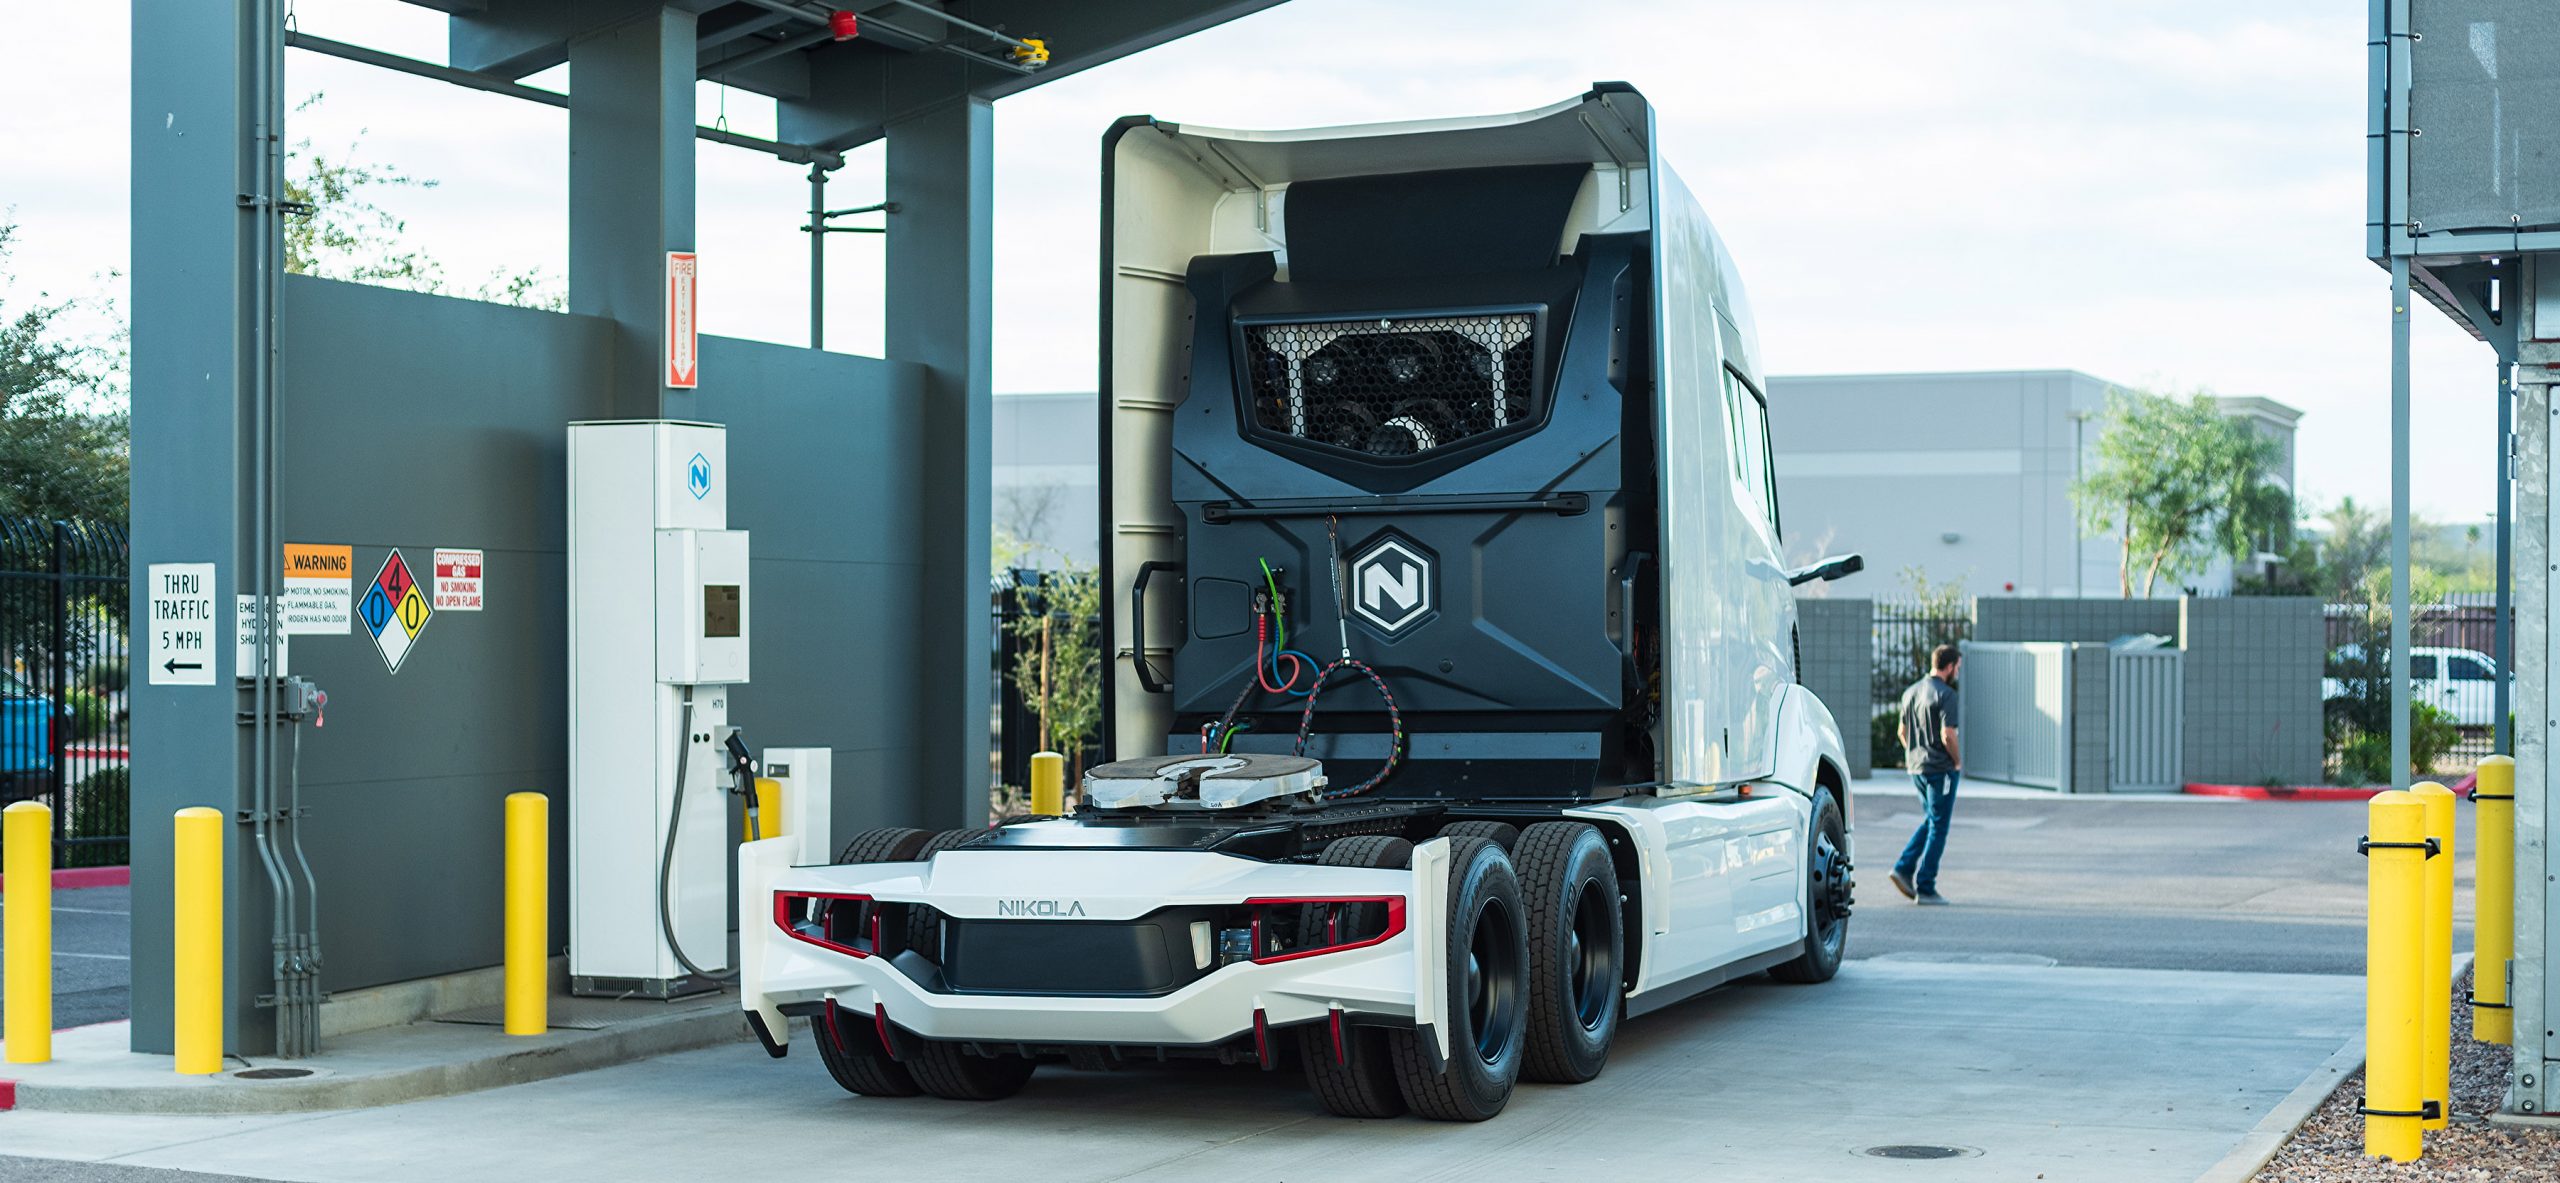 Nikola To Build Fuel-Cell Stations